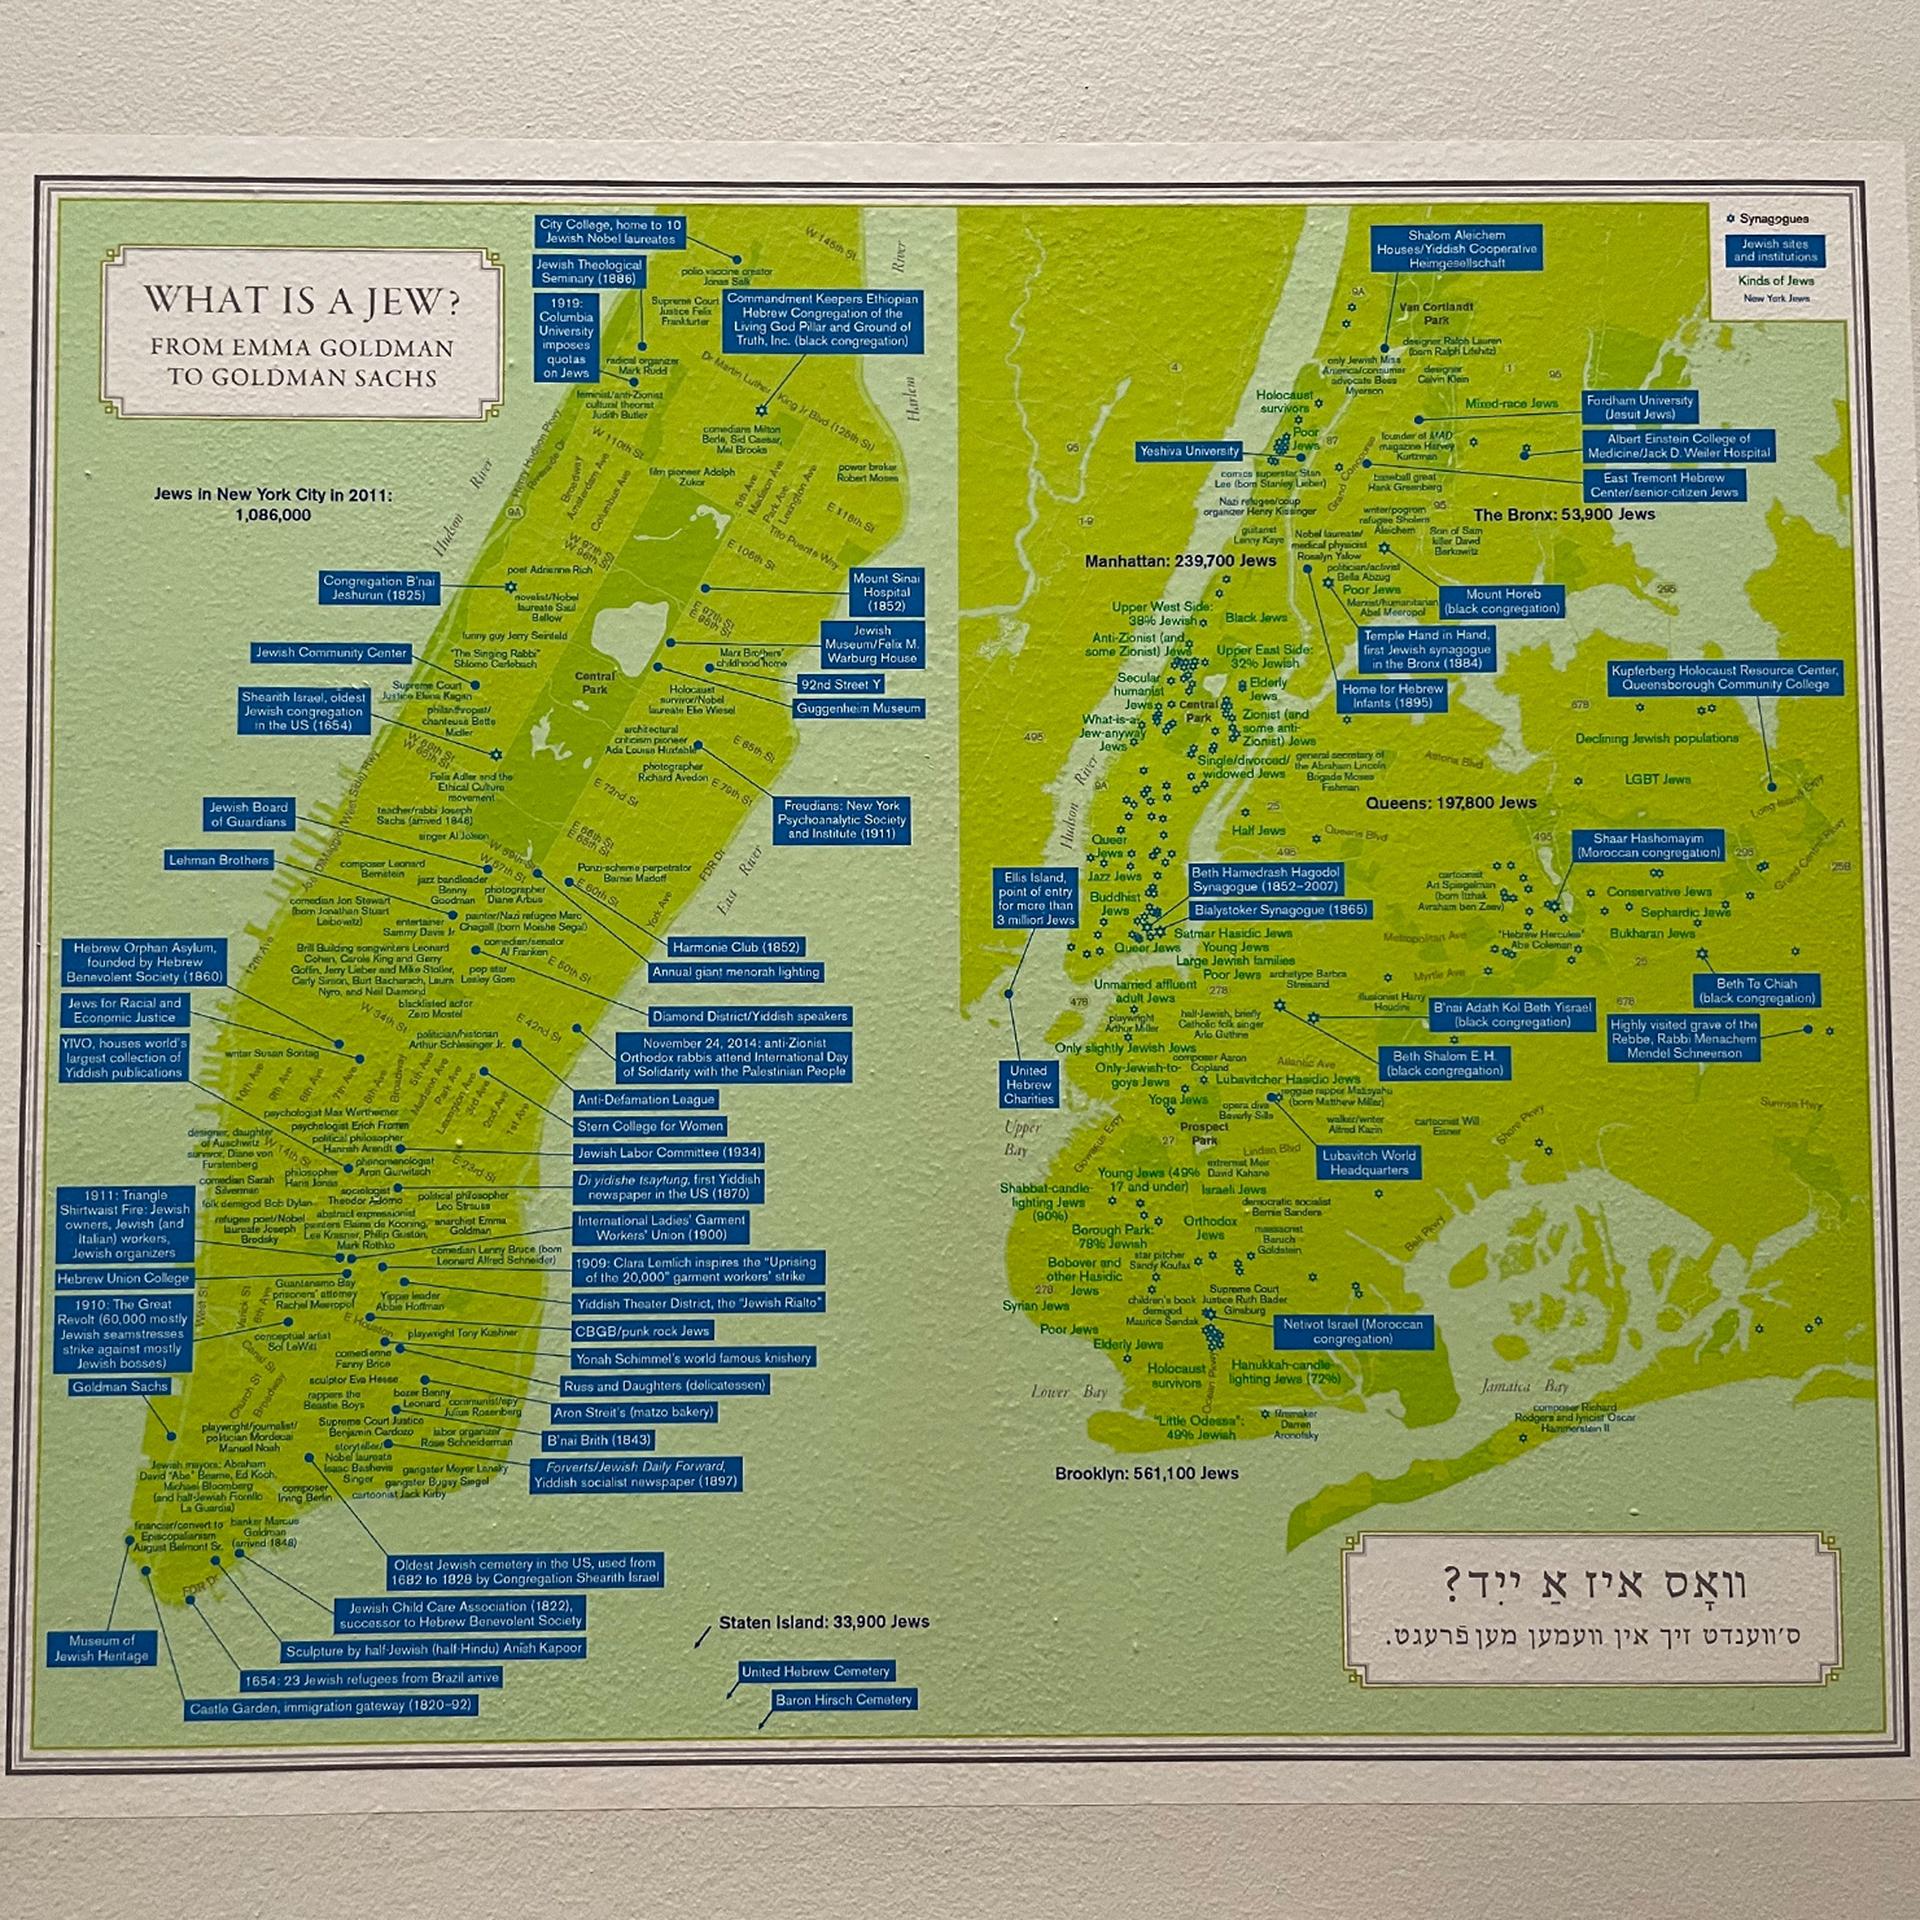 A map of Jewish heritage sites and institutions across New York, called 